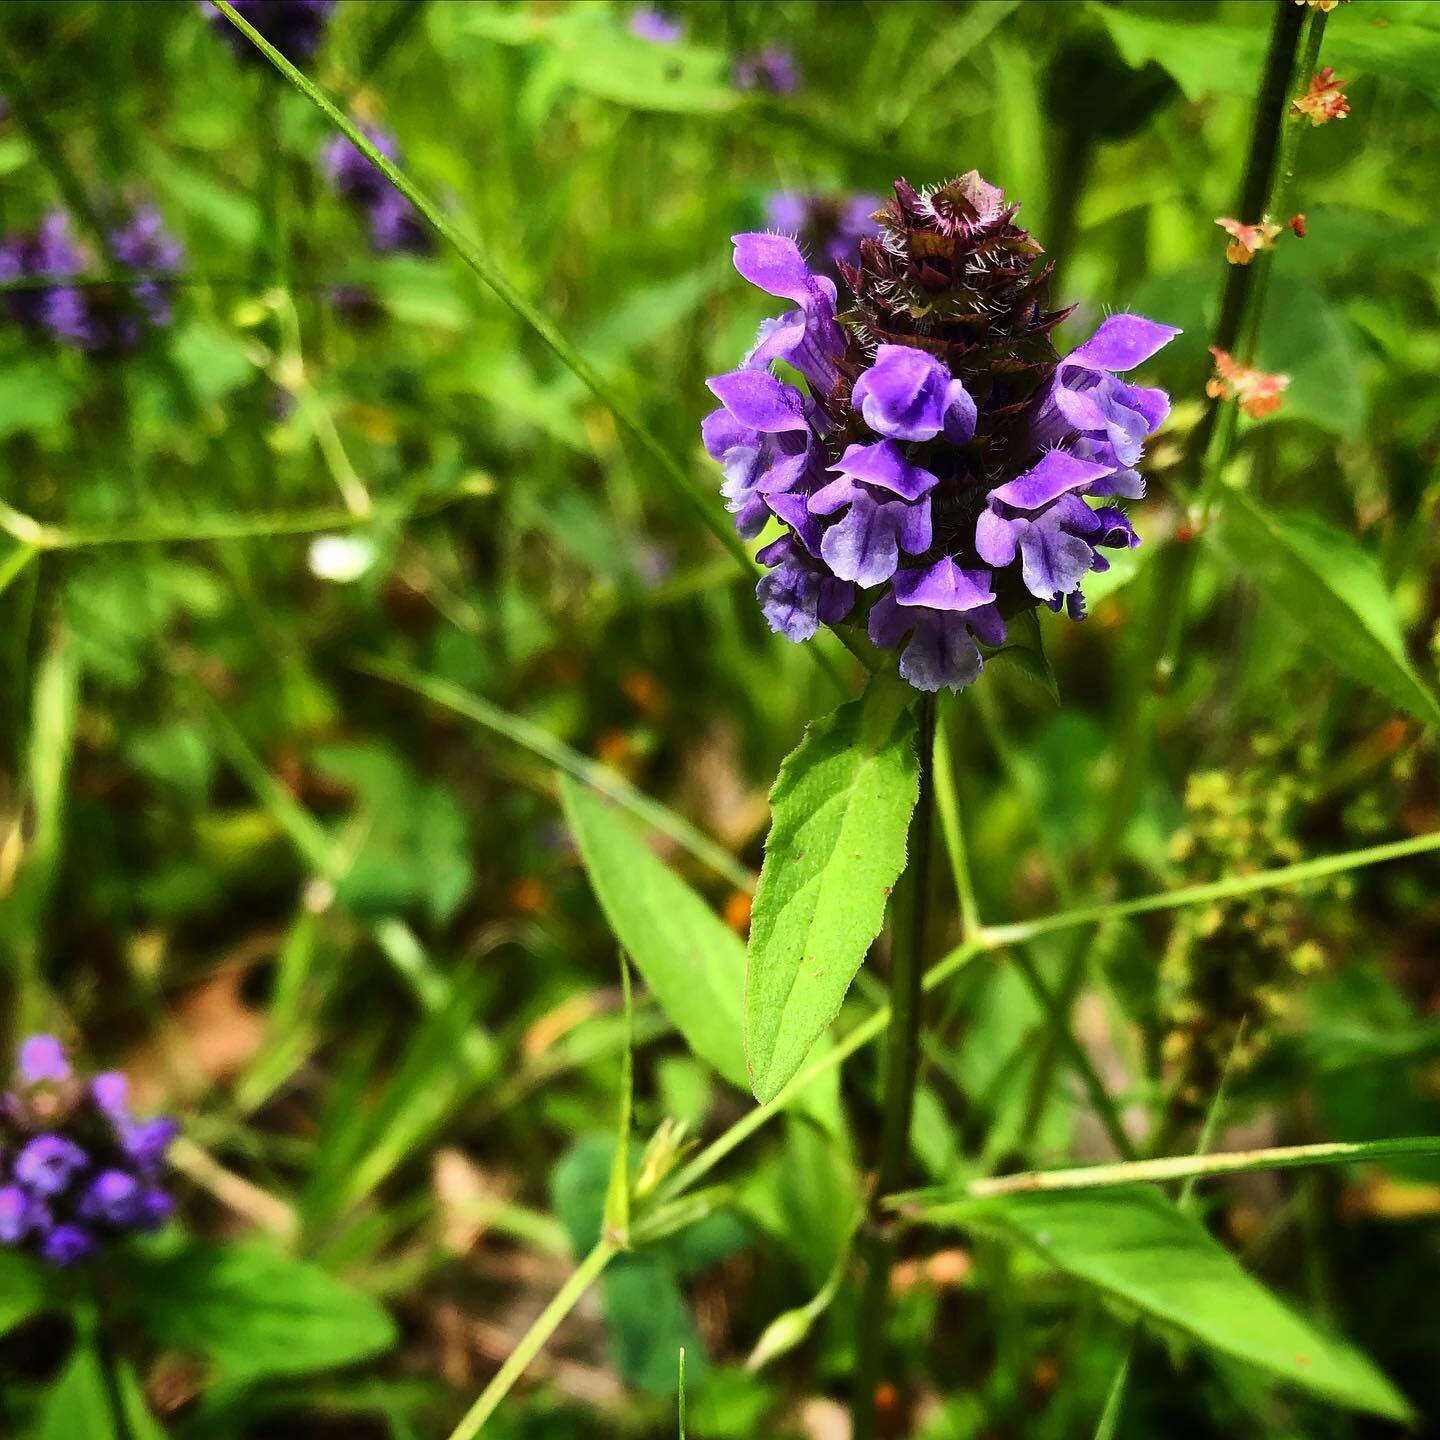 Self Heal, Heal All, Prunella vulgaris is one of the herbs I talk about in this week&rsquo;s Healthy Herb Podcast. Listen wherever you listen to podcasts. This herb is blooming now in most yards and many gardens. I like to harvest the flowering stems